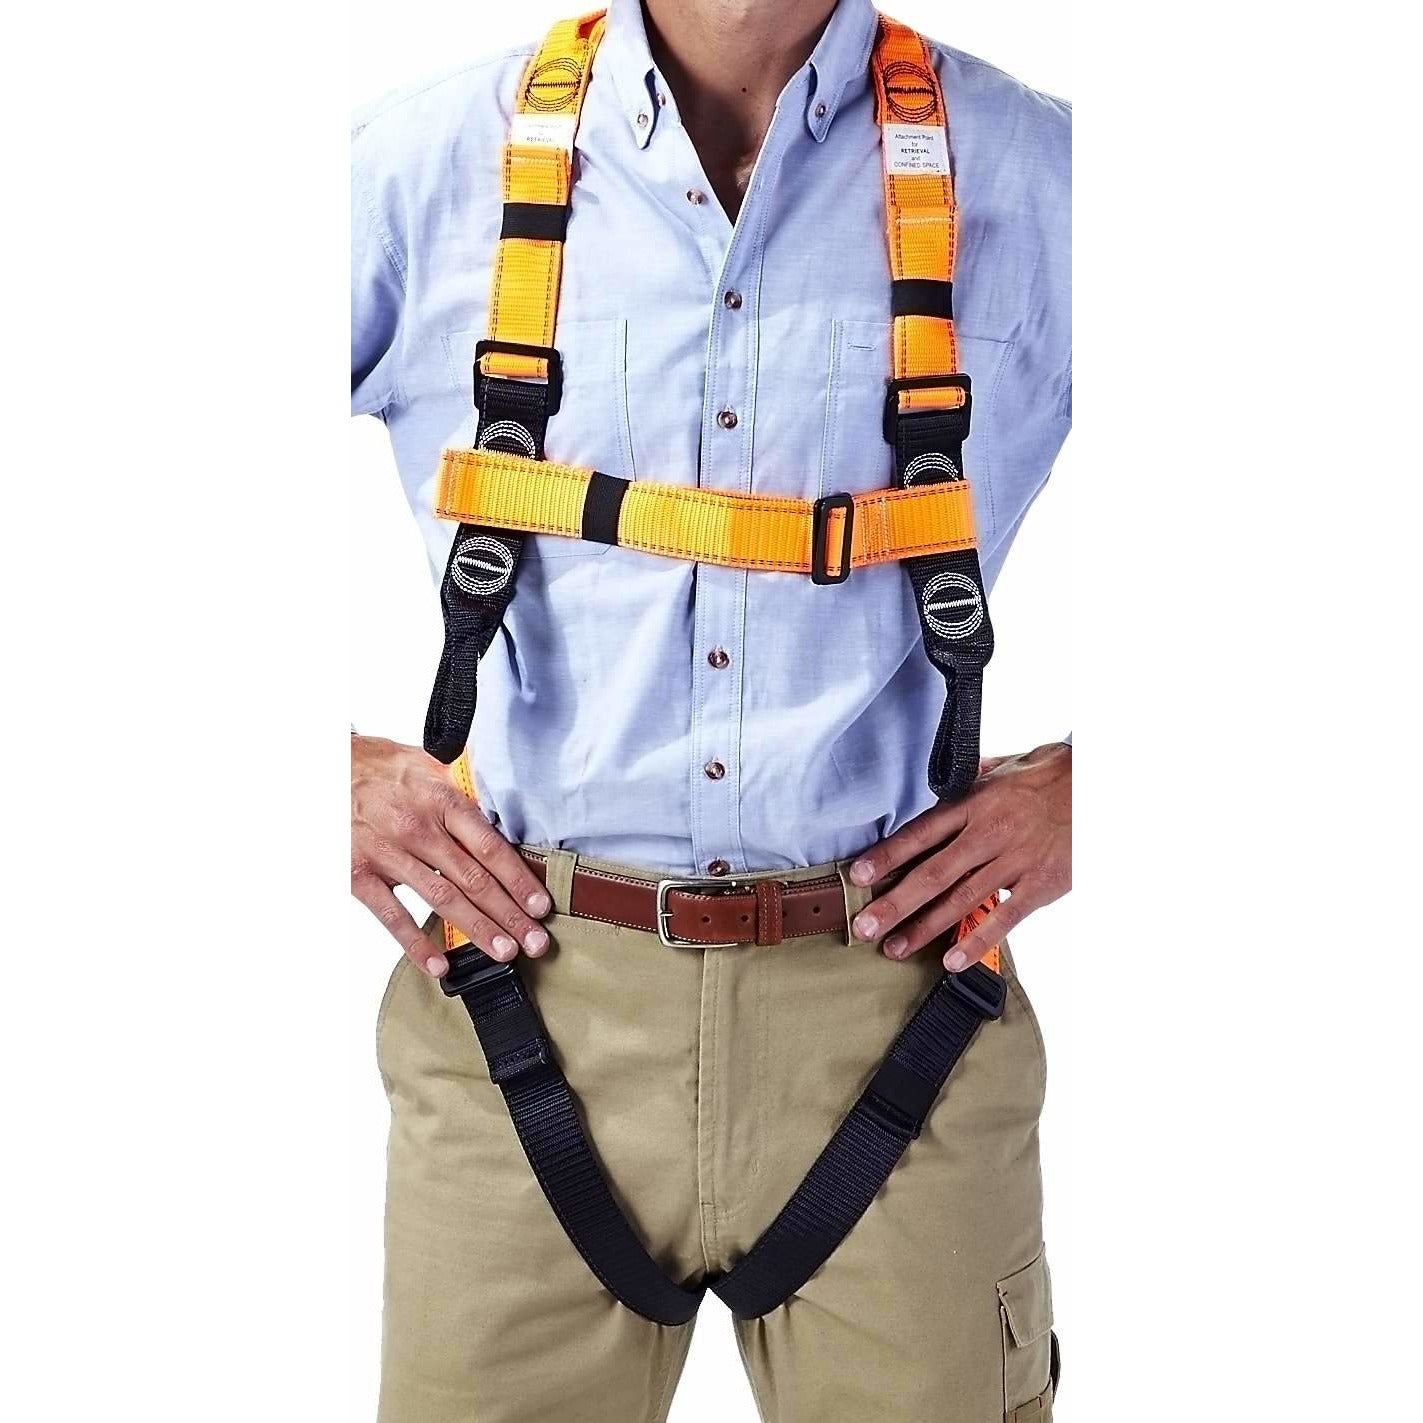 LINQ Essential Safety Harness Product of Pro Choice Safety - Height Safety Gear - Best Buy Trade Supplies Direct to Trade